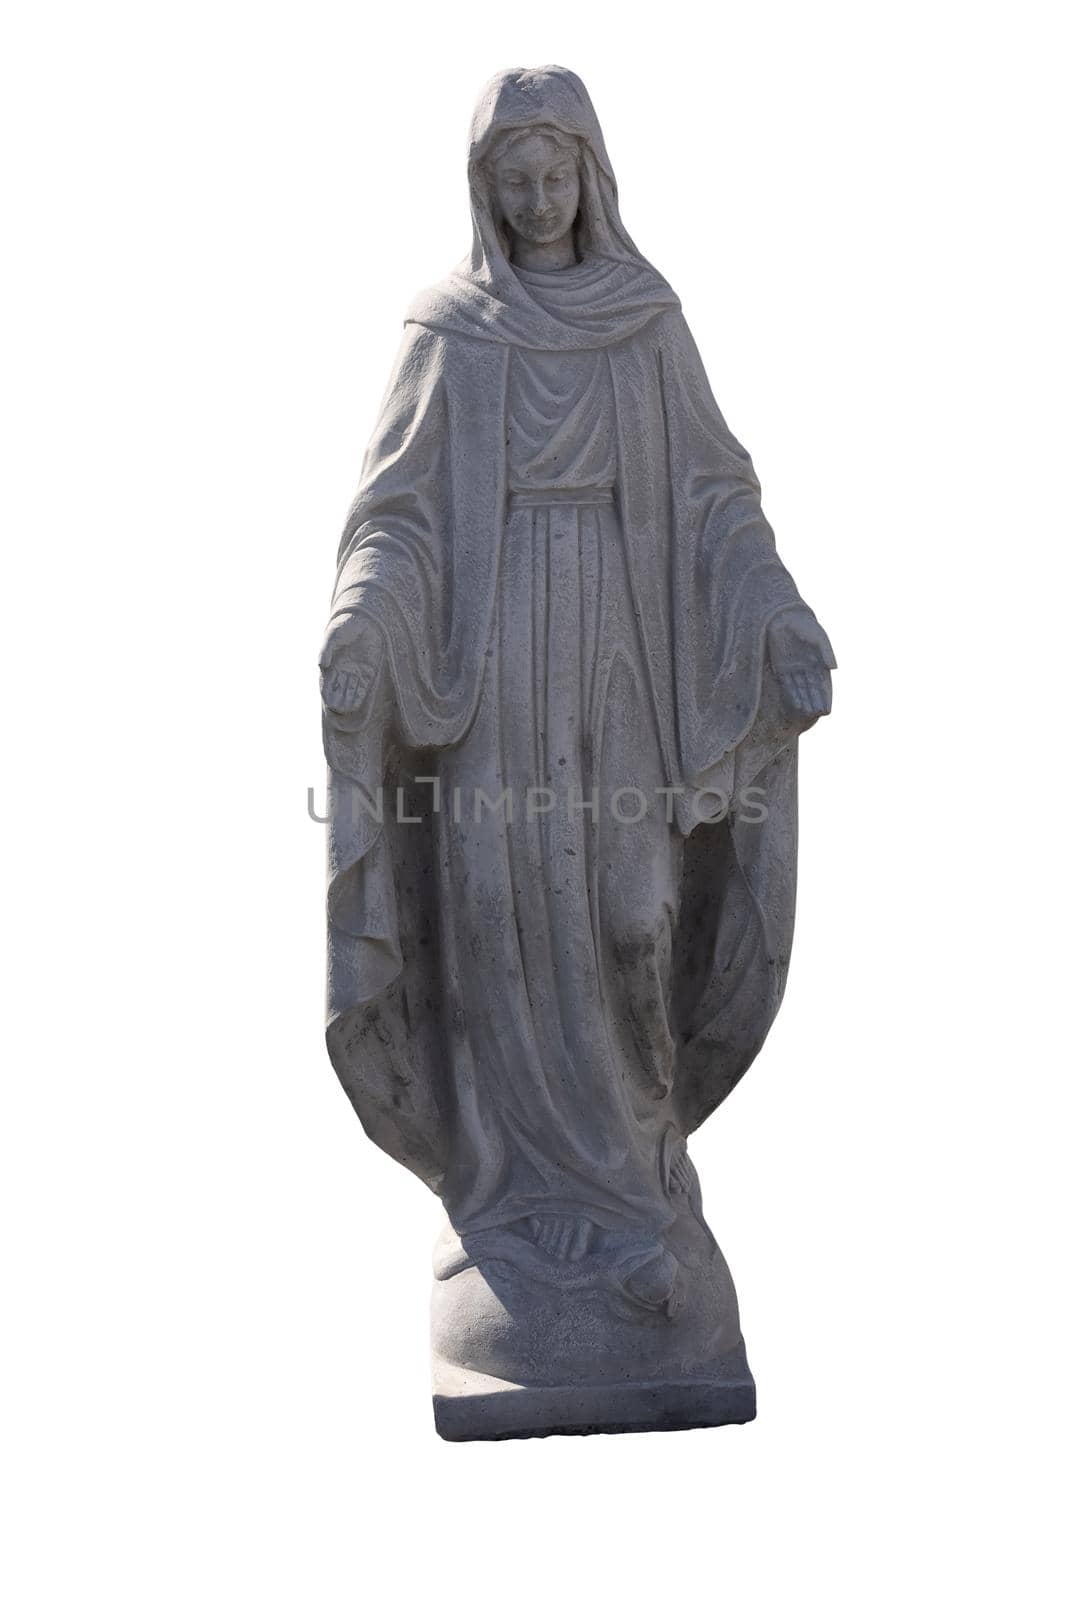 Stone sculpture of virgin mary on white background. art and classical style romantic figurative stone sculpture.